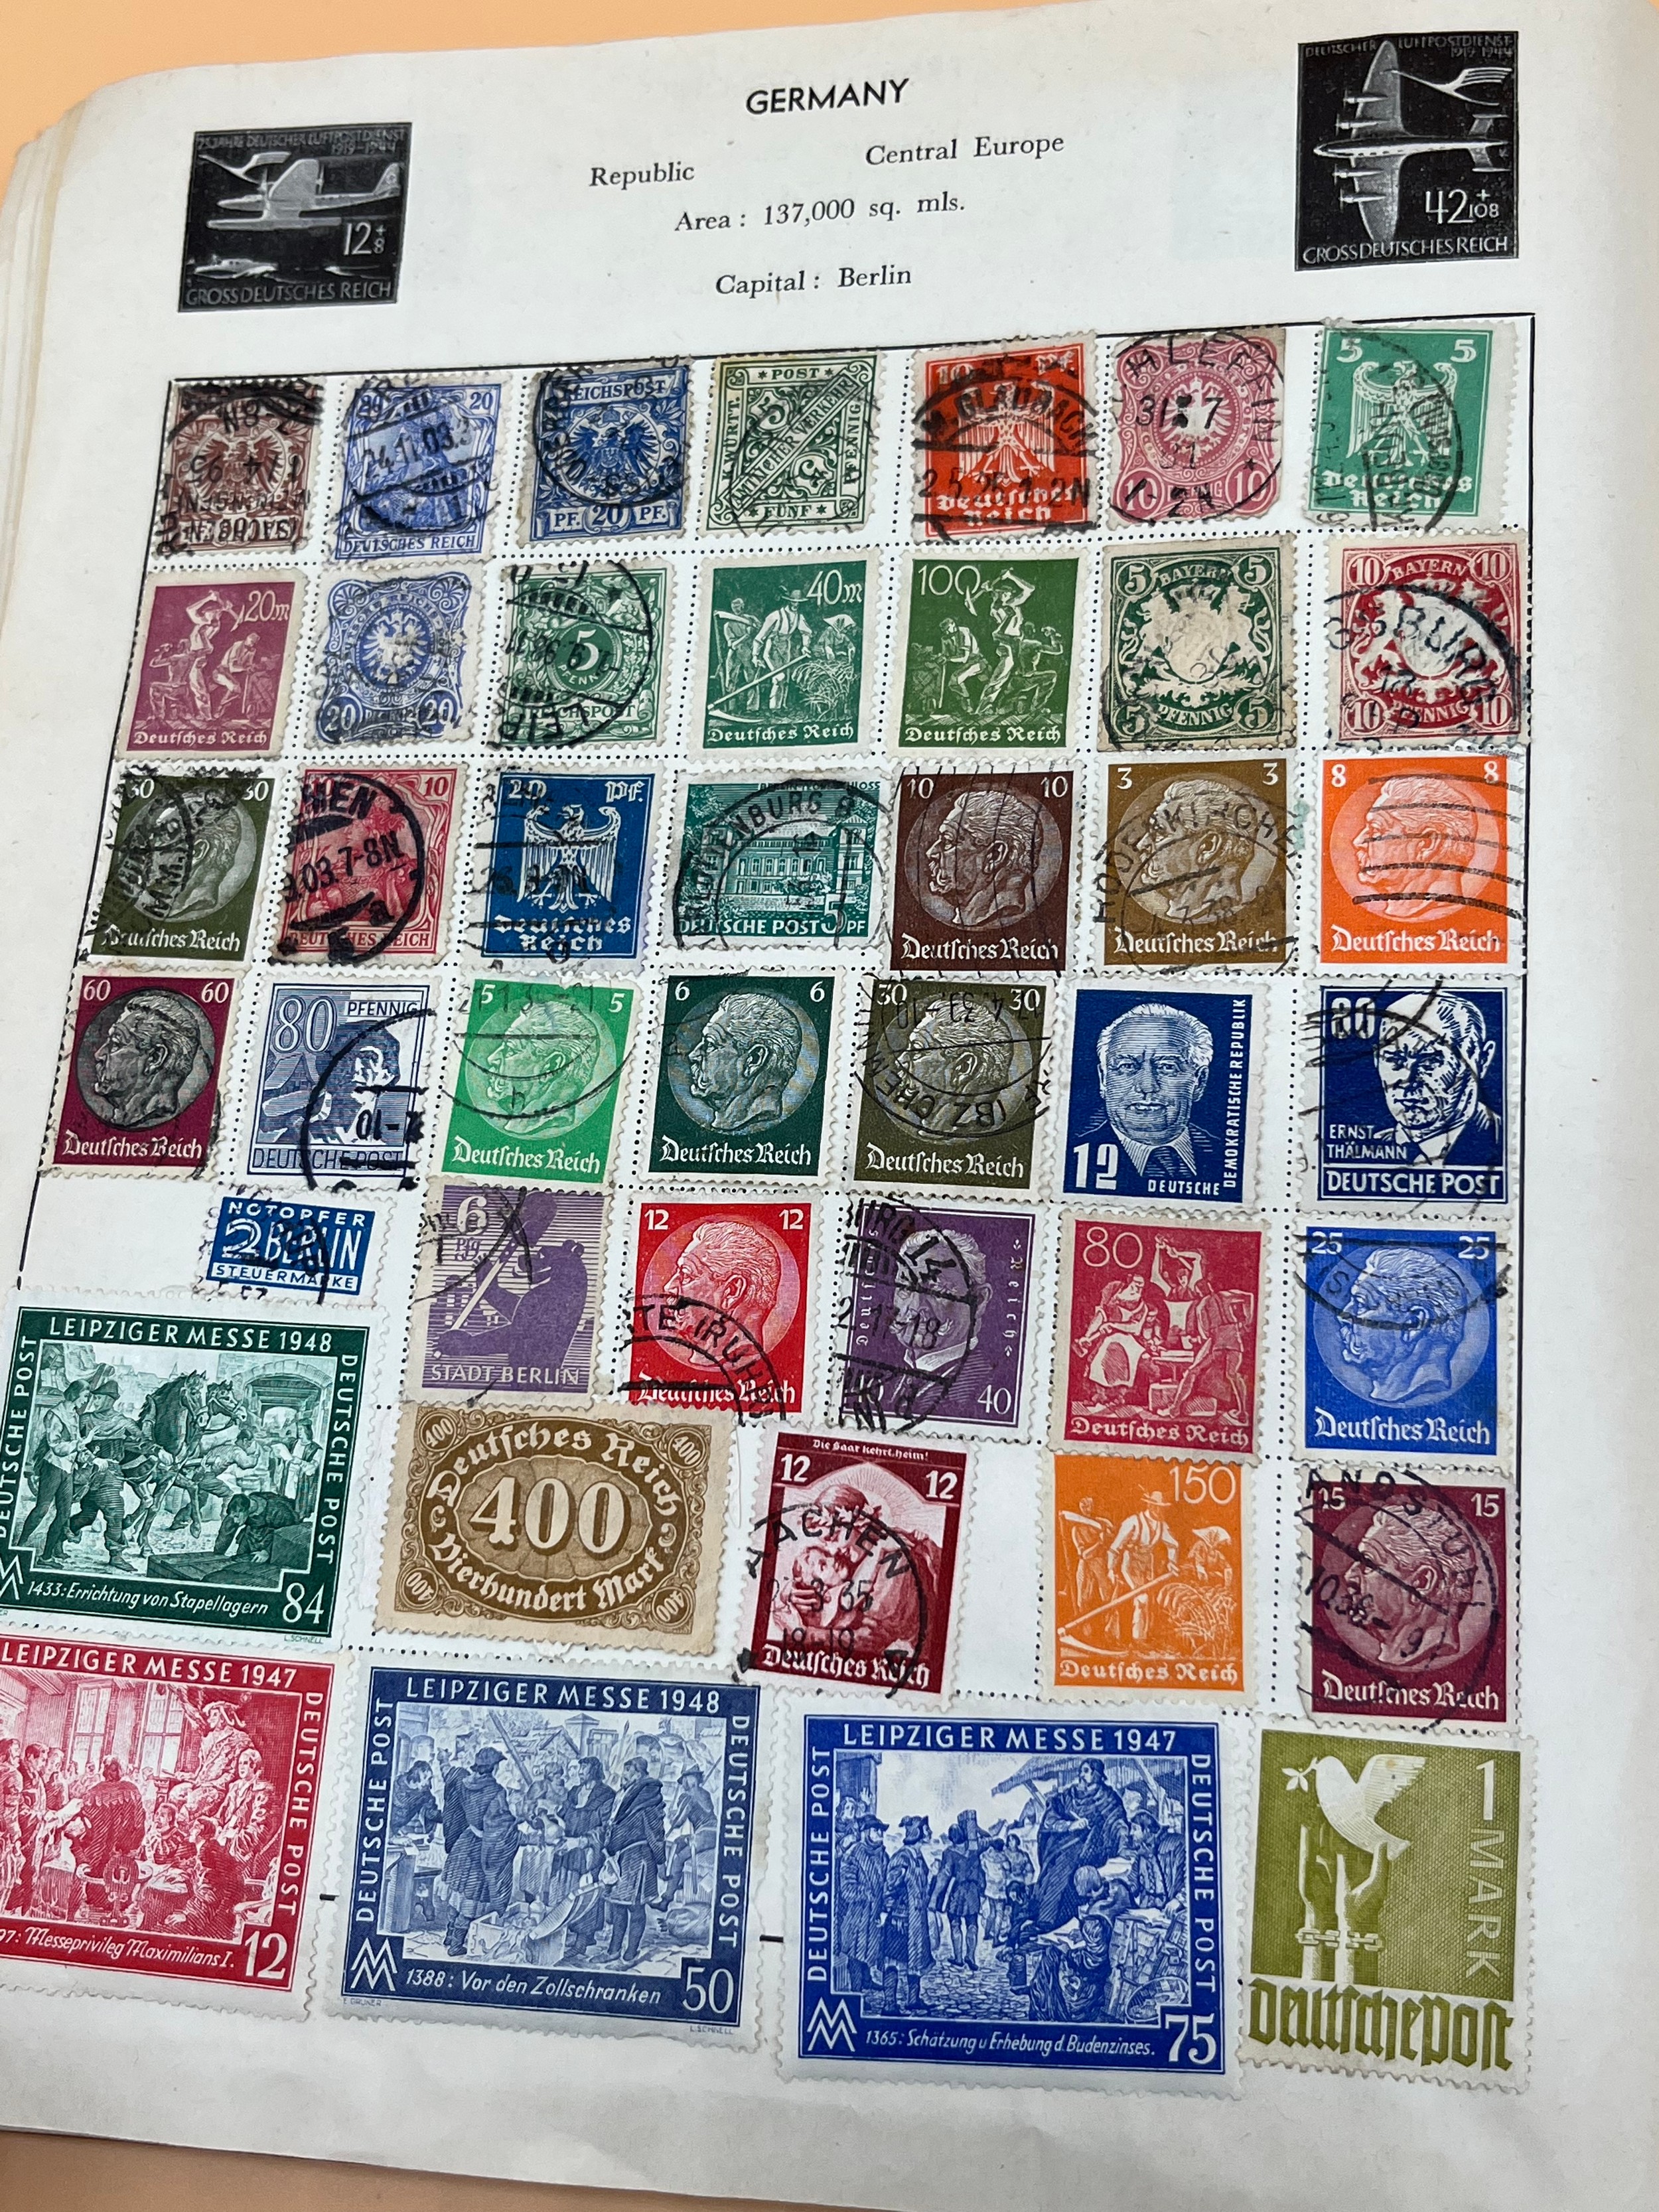 Vintage stamp album containing a collection of world stamps - Image 13 of 22